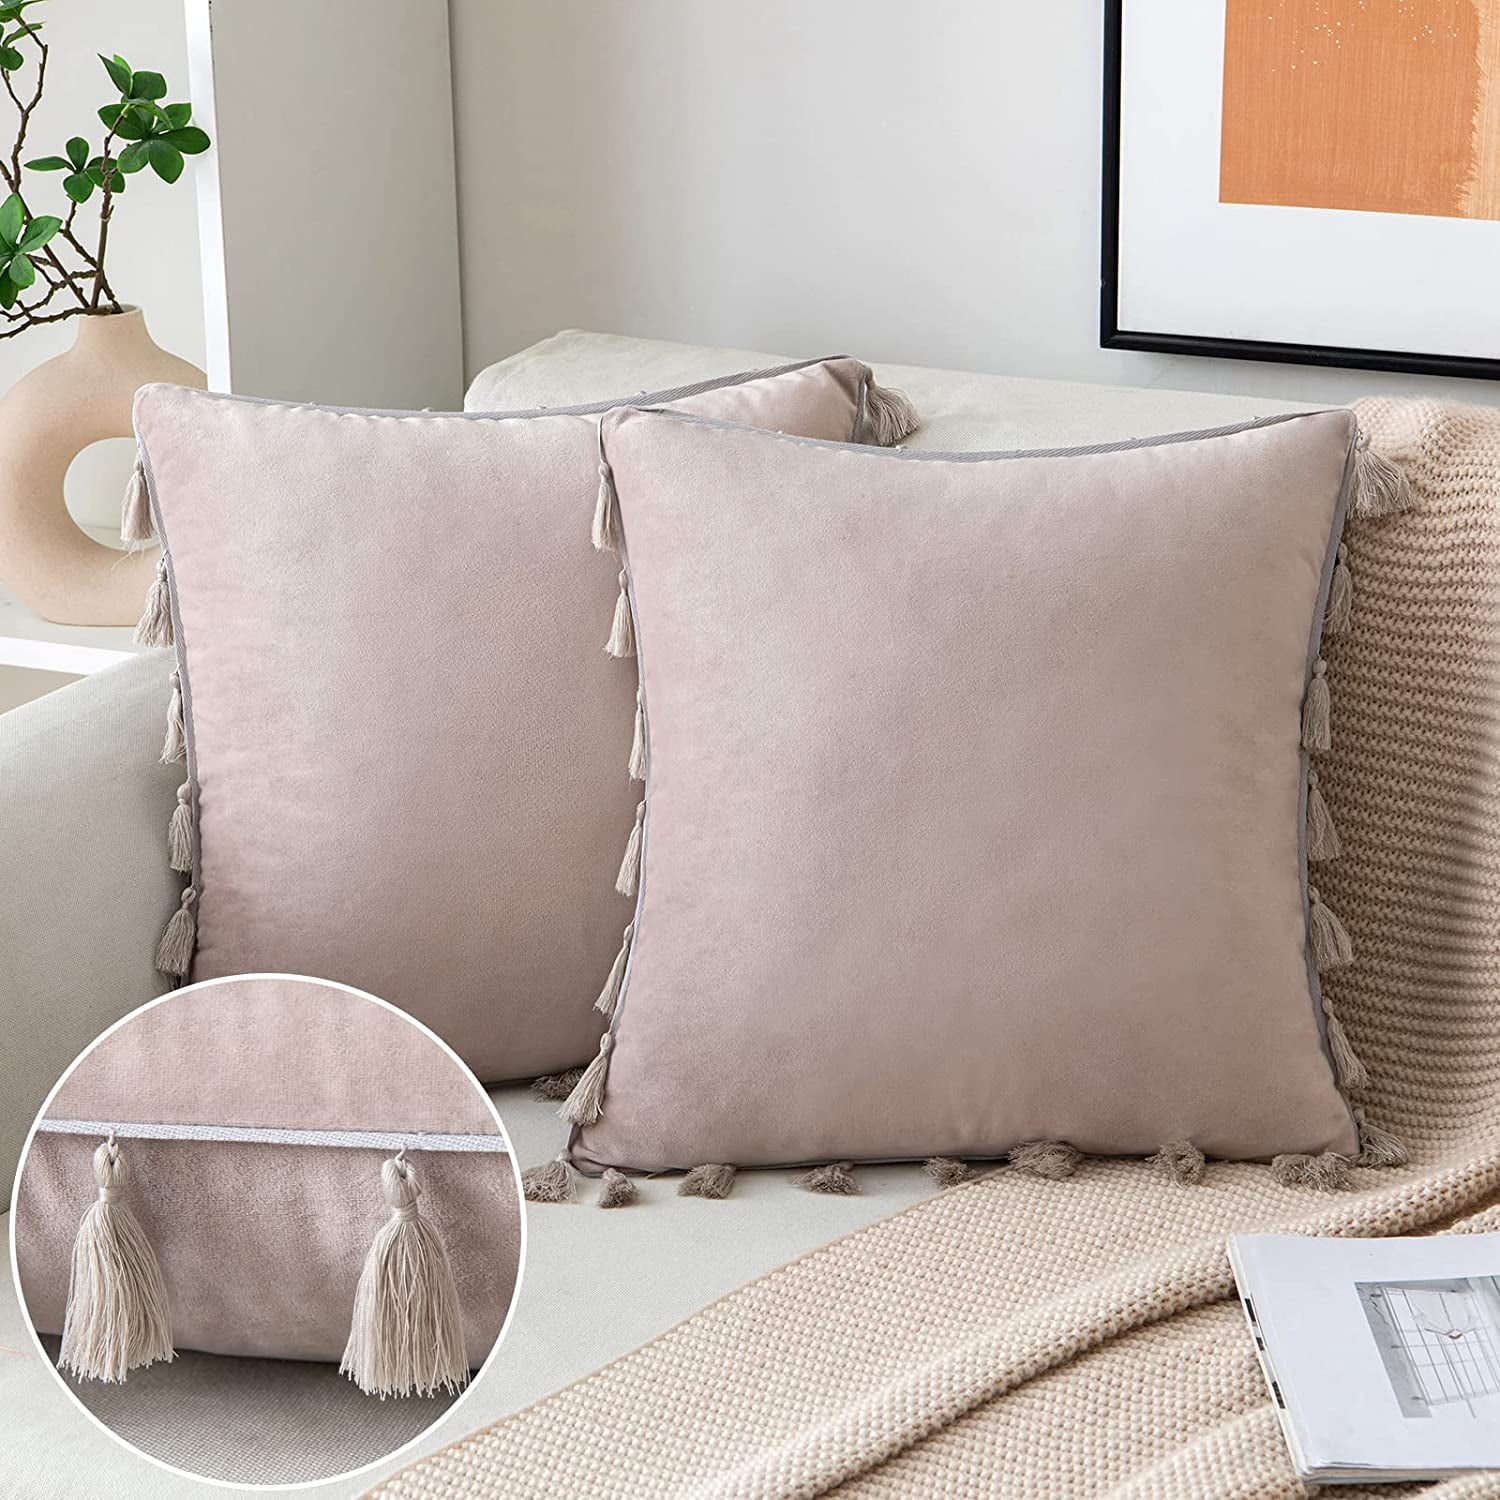  Home Brilliant Decorative Accent Pillow Covers Pom Pom Boho Throw  Pillows for Couch Bedroom Plush Cushion Cover for Sofa, 2 Pack, 18x18 inch  (45cm), Pure White : Home & Kitchen